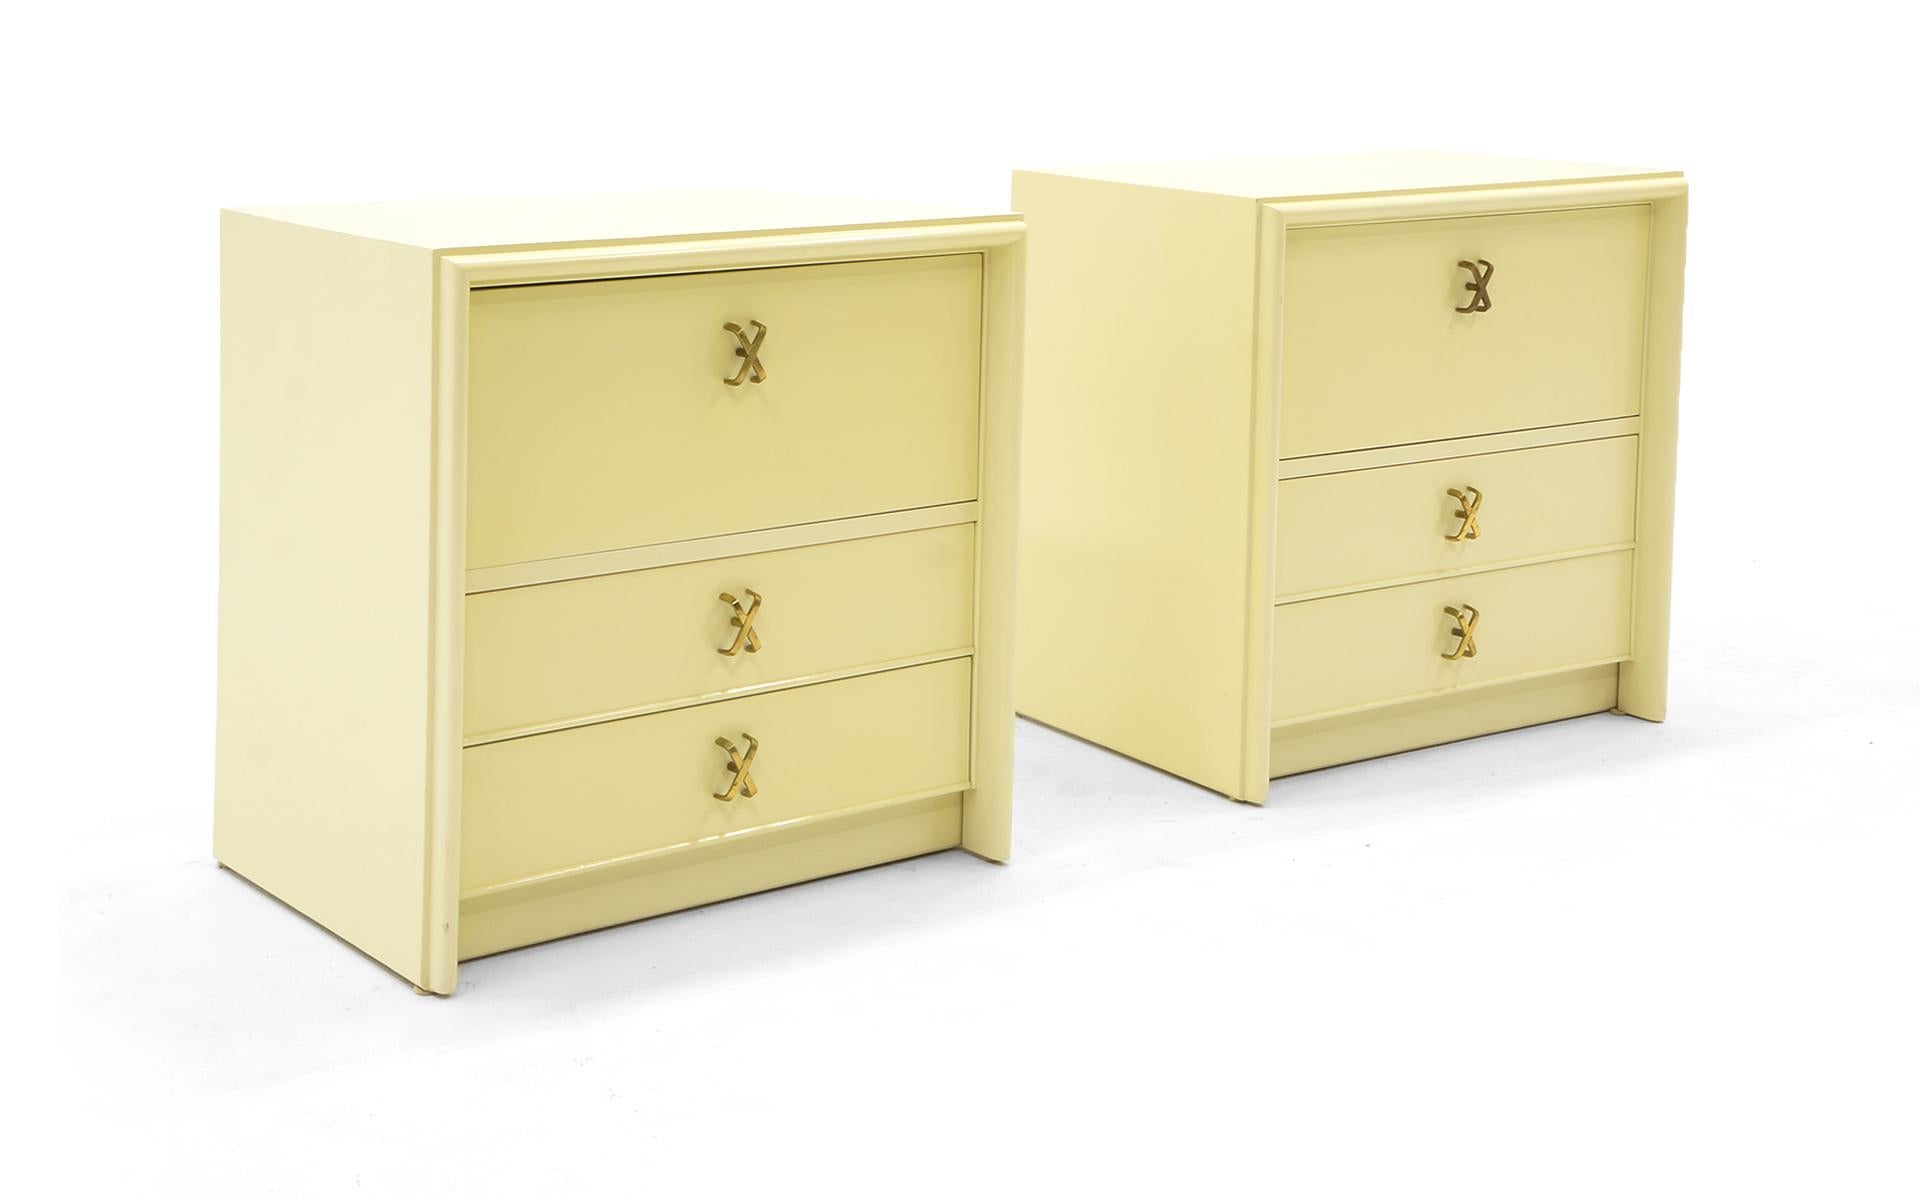 Pair of nightstands / side tables designed by the most important American Art Deco furniture designer, Paul Frankl, for Johnson Furniture Company and sold by John Stuart Inc, New York. Signed with the branded Johnson Furniture logo and metal John